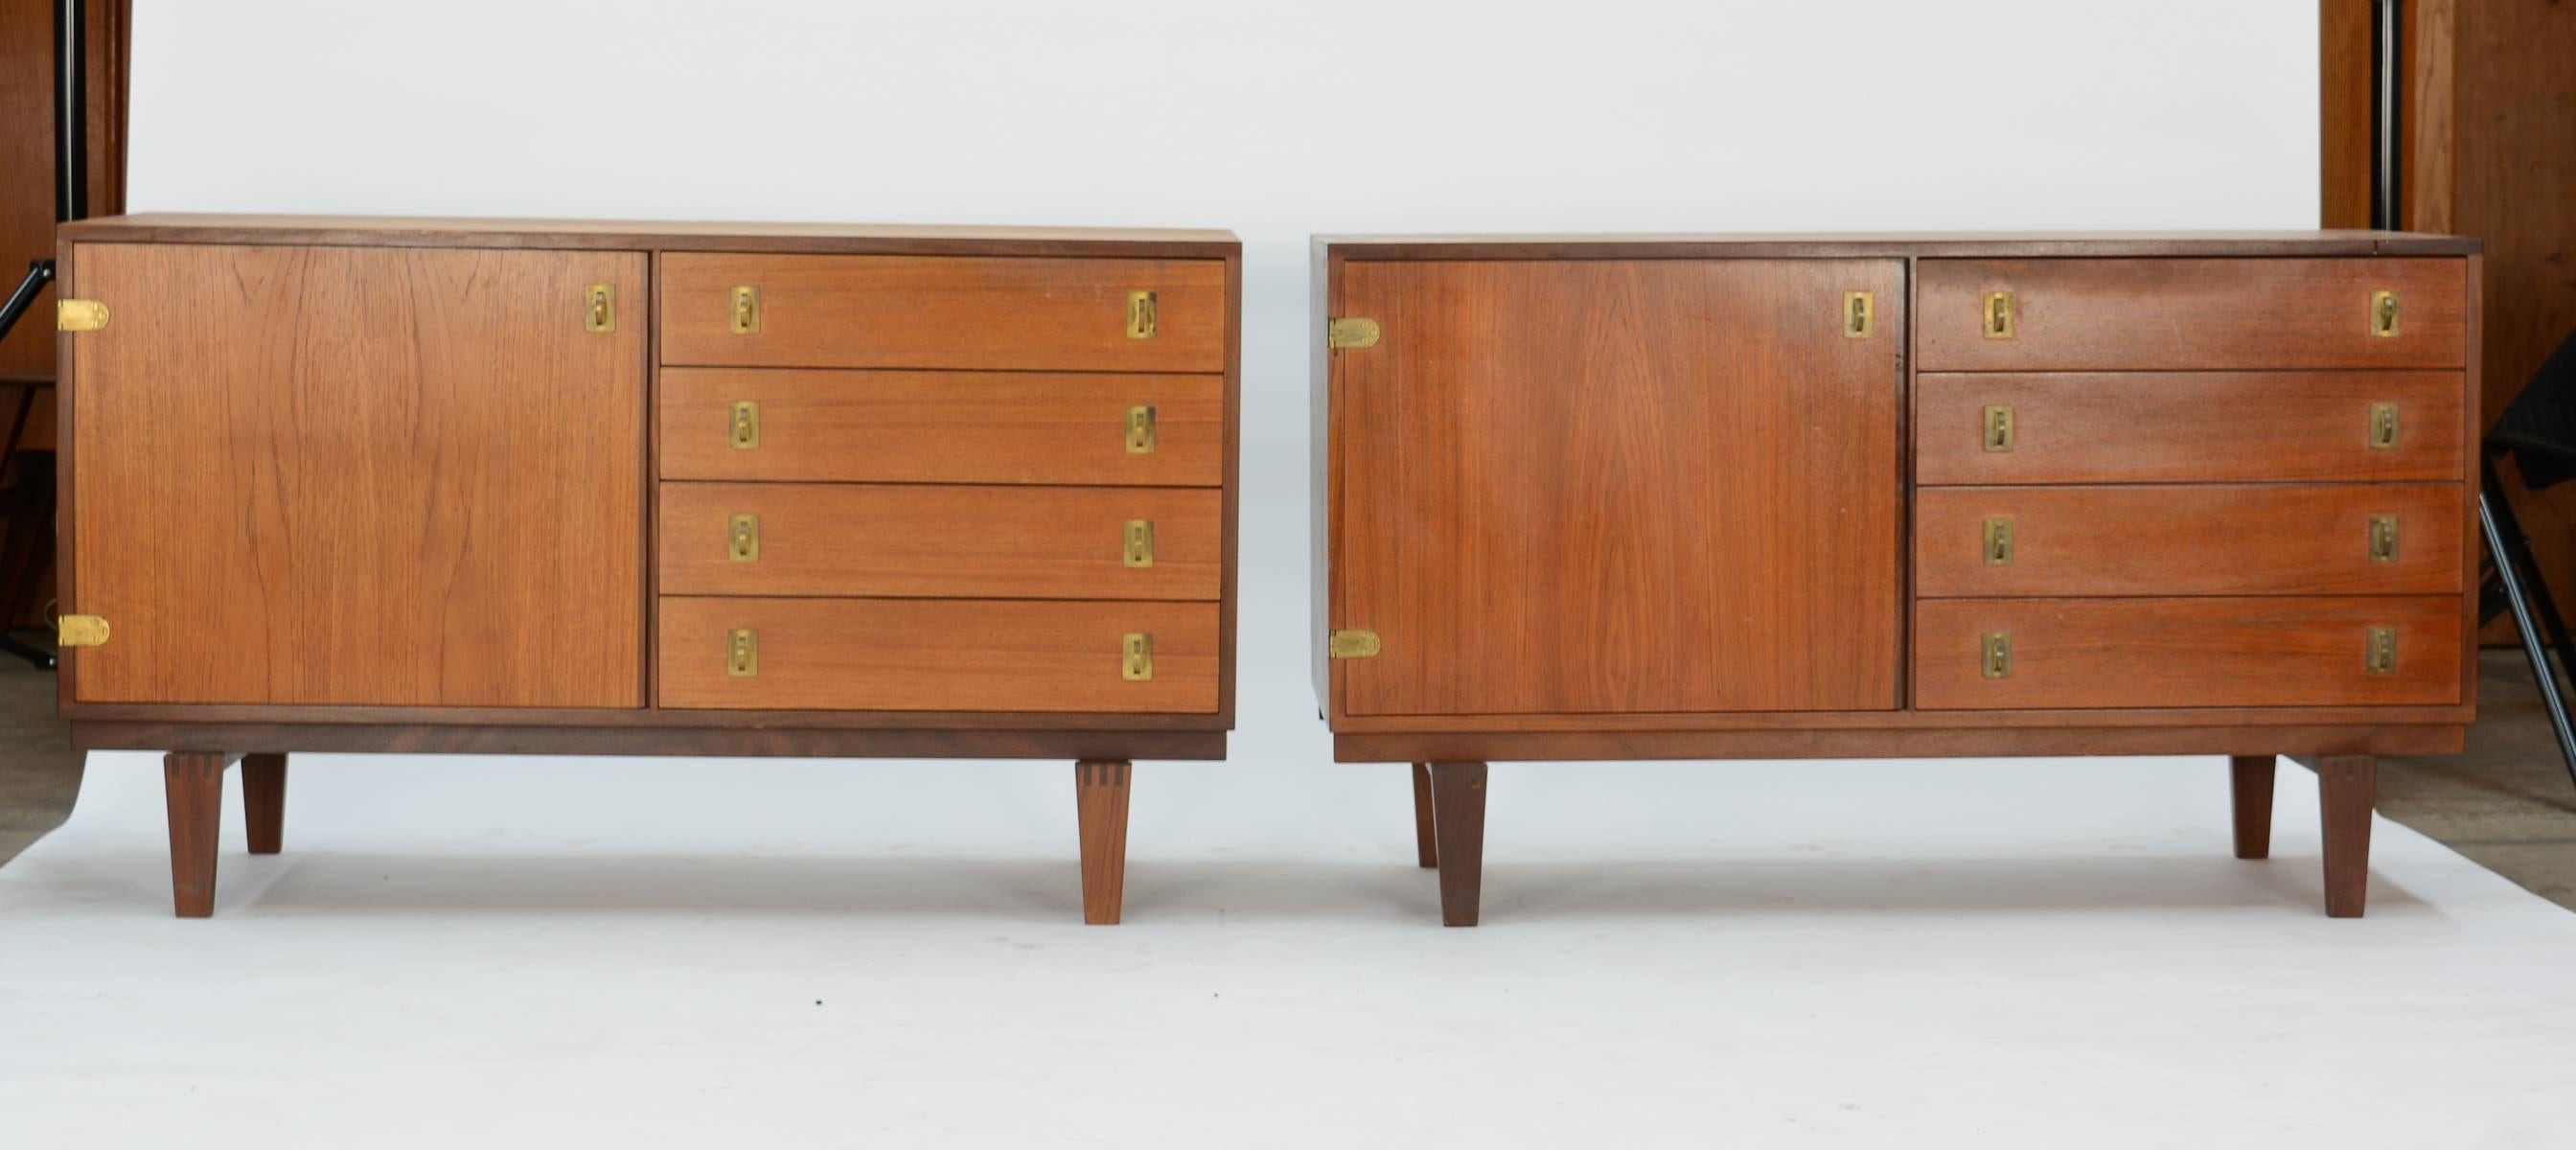 Pair of finely detailed matching Peter Lovig Nielsen Credenzas with brass pulls.